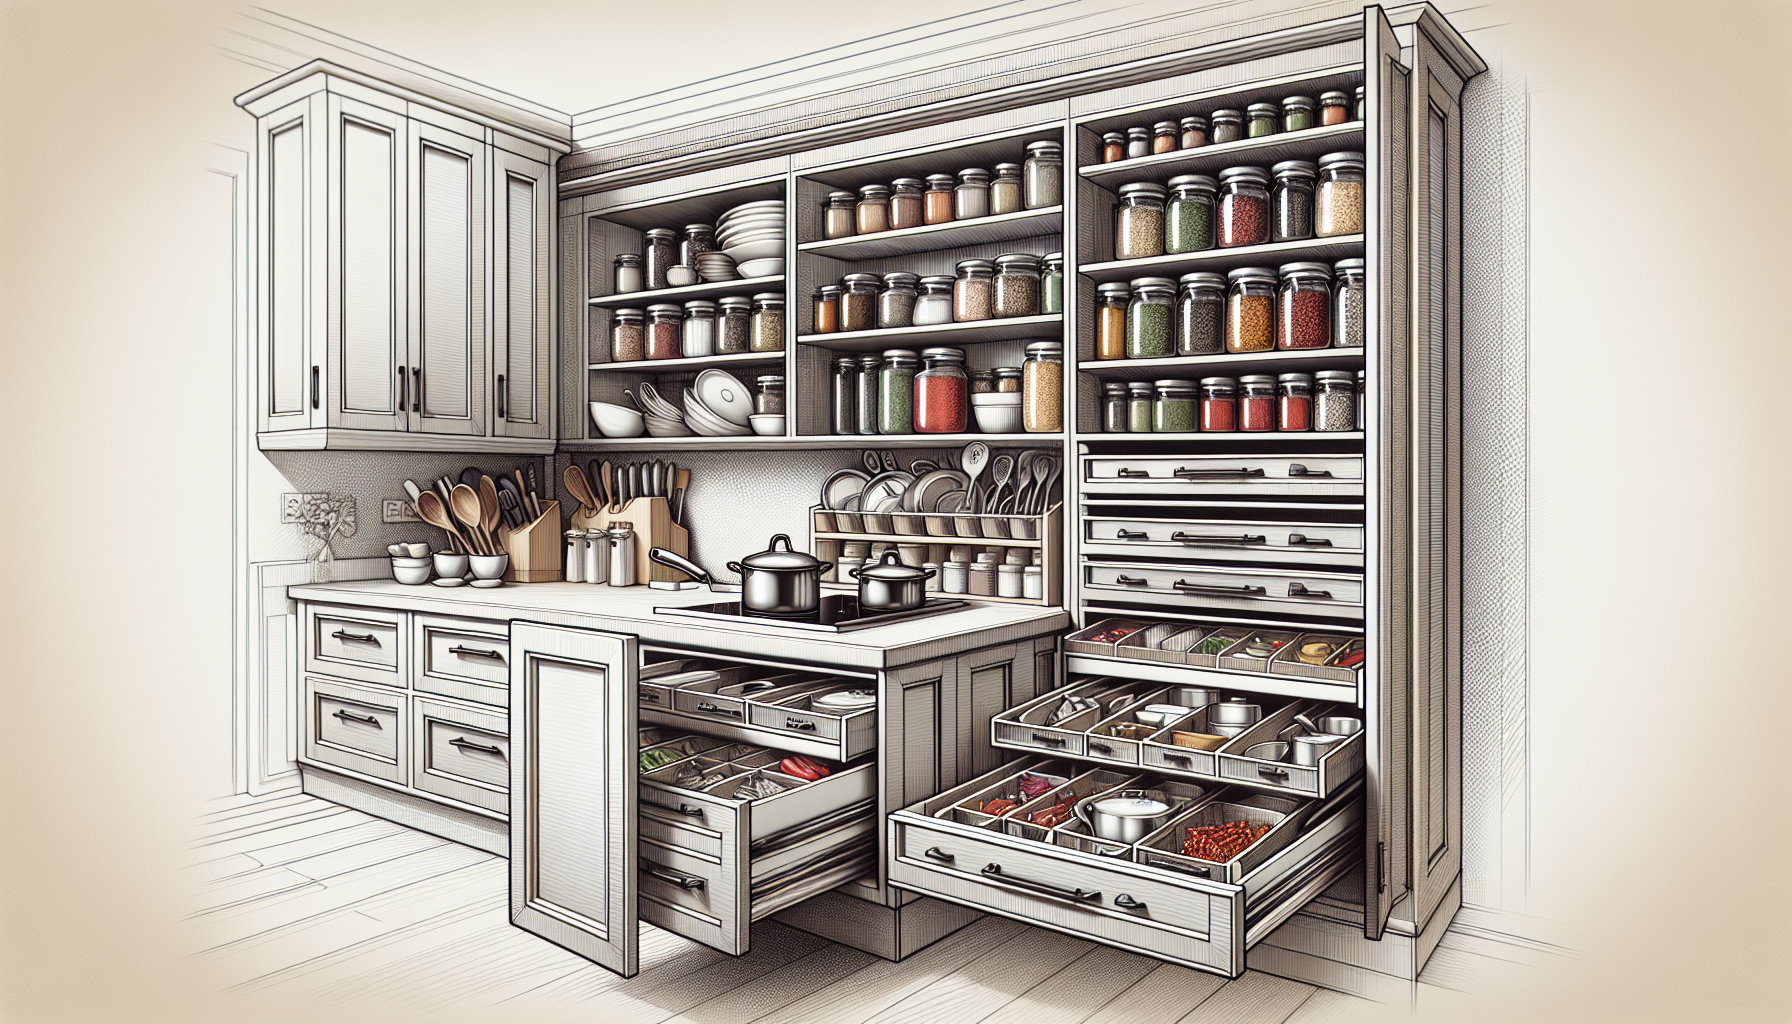 Illustration of maximizing kitchen space with shaker style cabinets